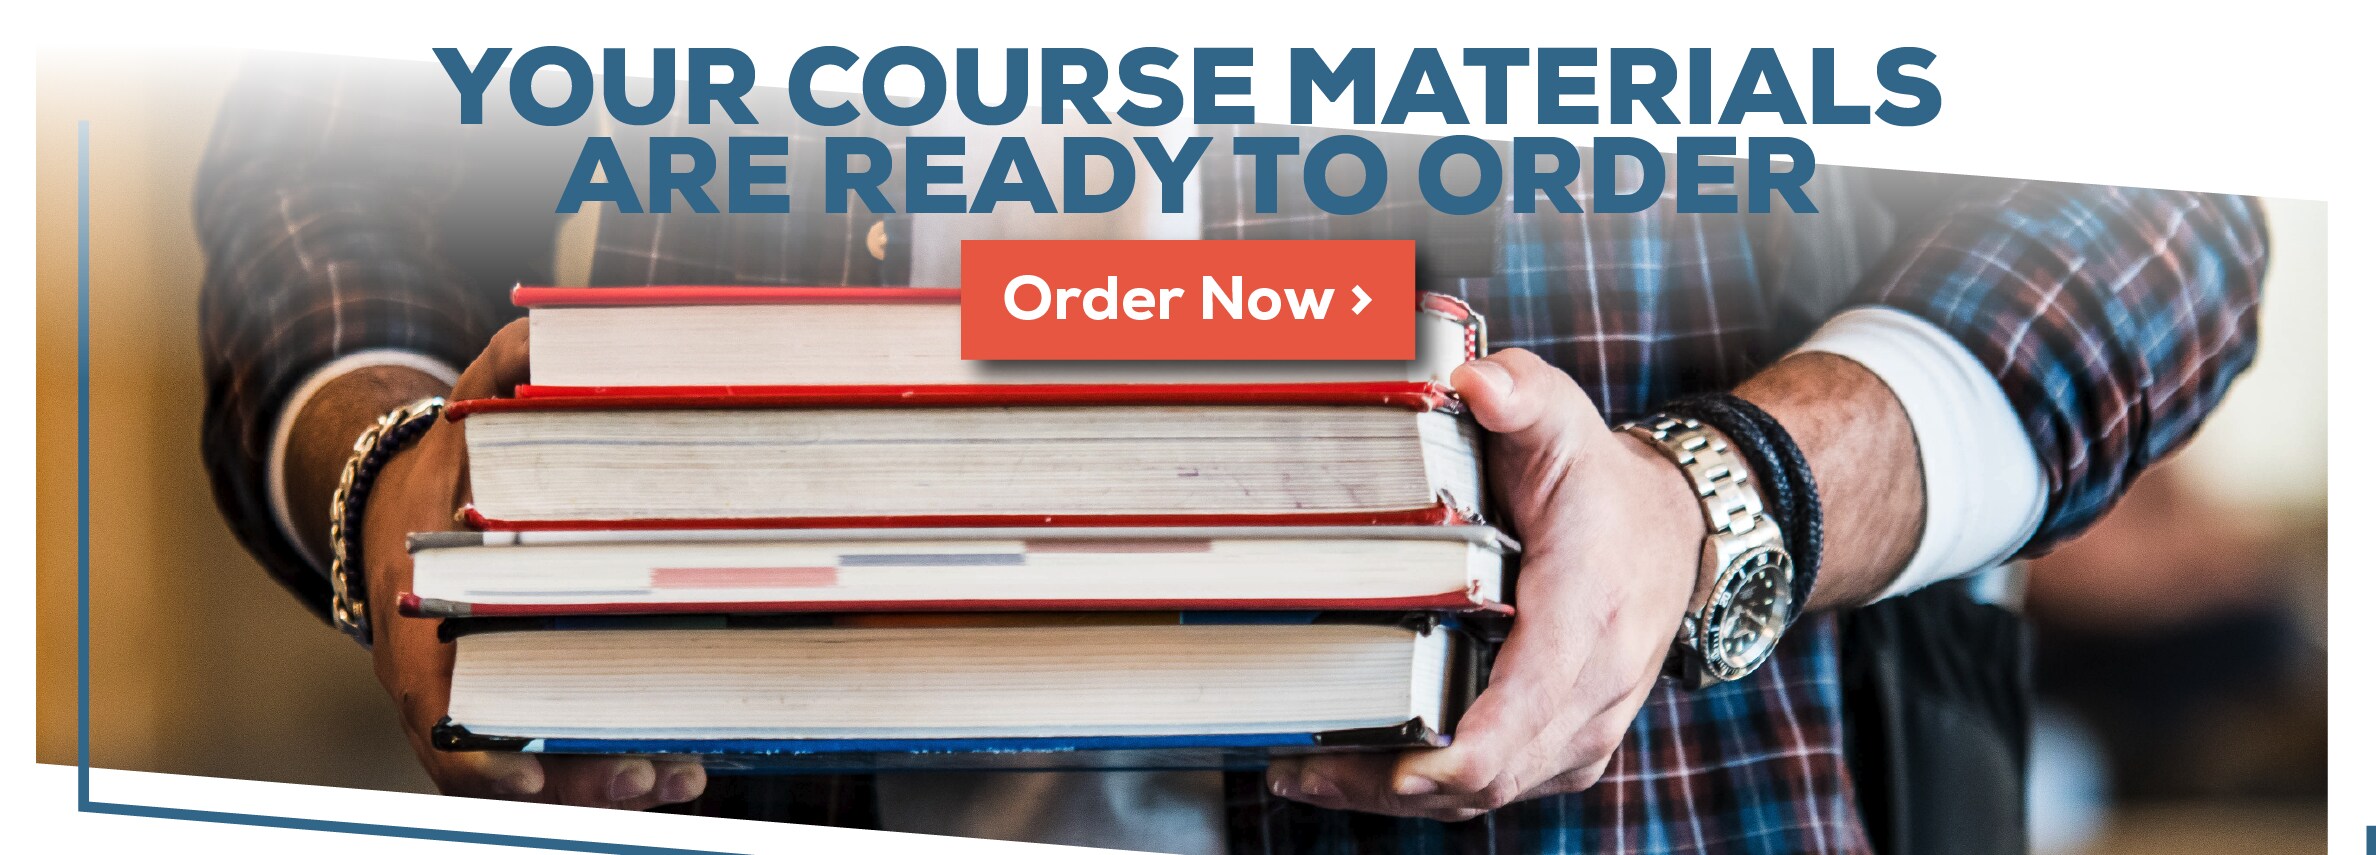 Your Course Materials are Ready to Order. Order Now.